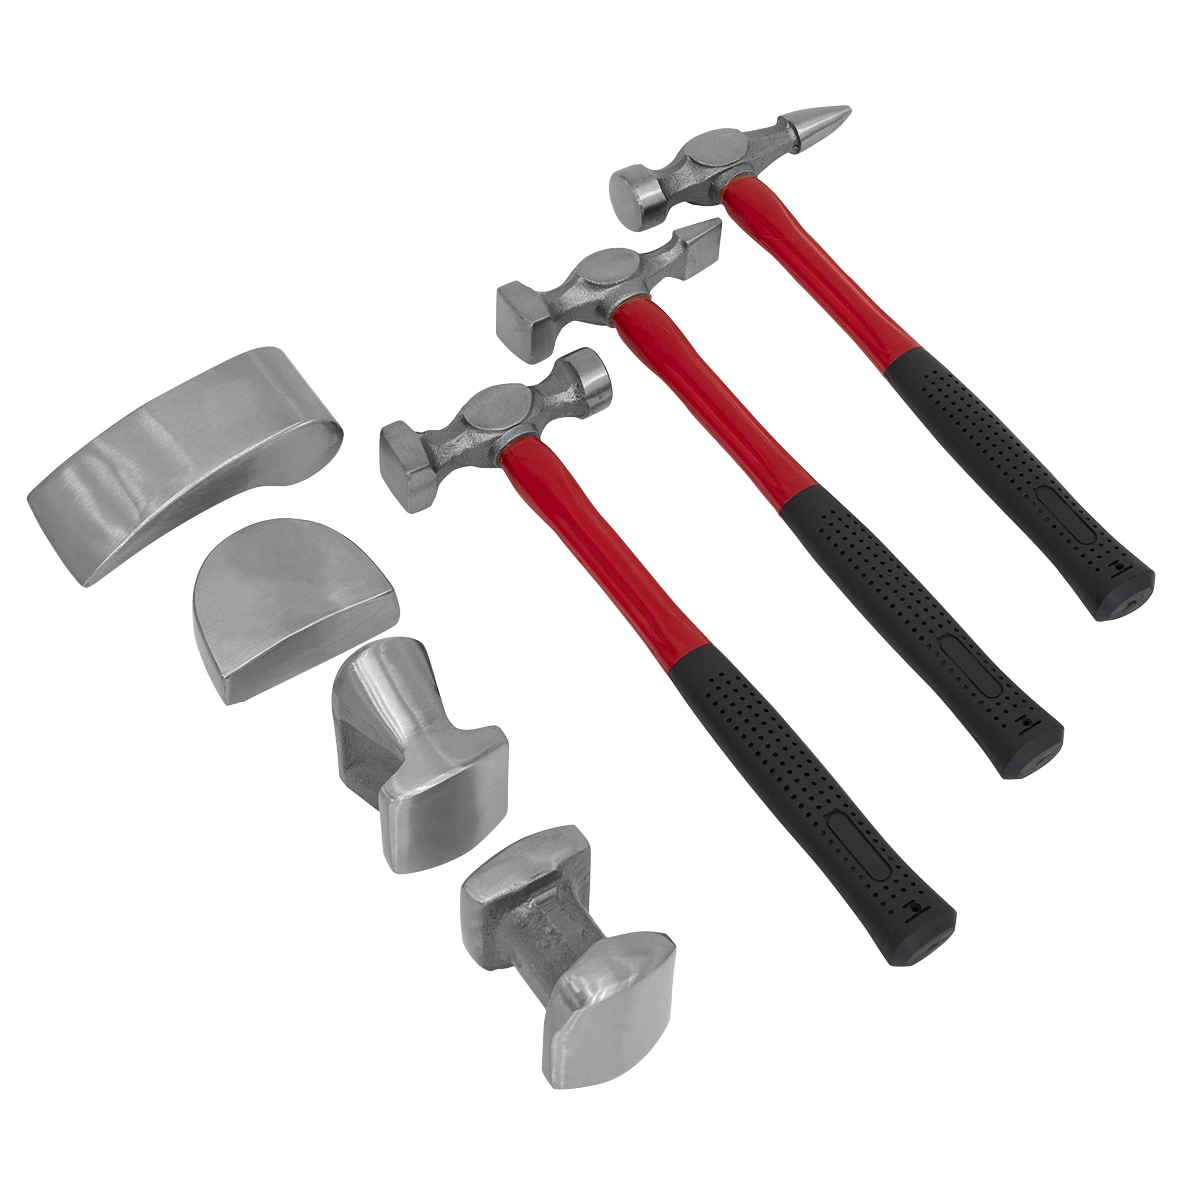 Sealey 7pc Drop-Forged Panel Beating Set with Fibreglass Shafts CB707